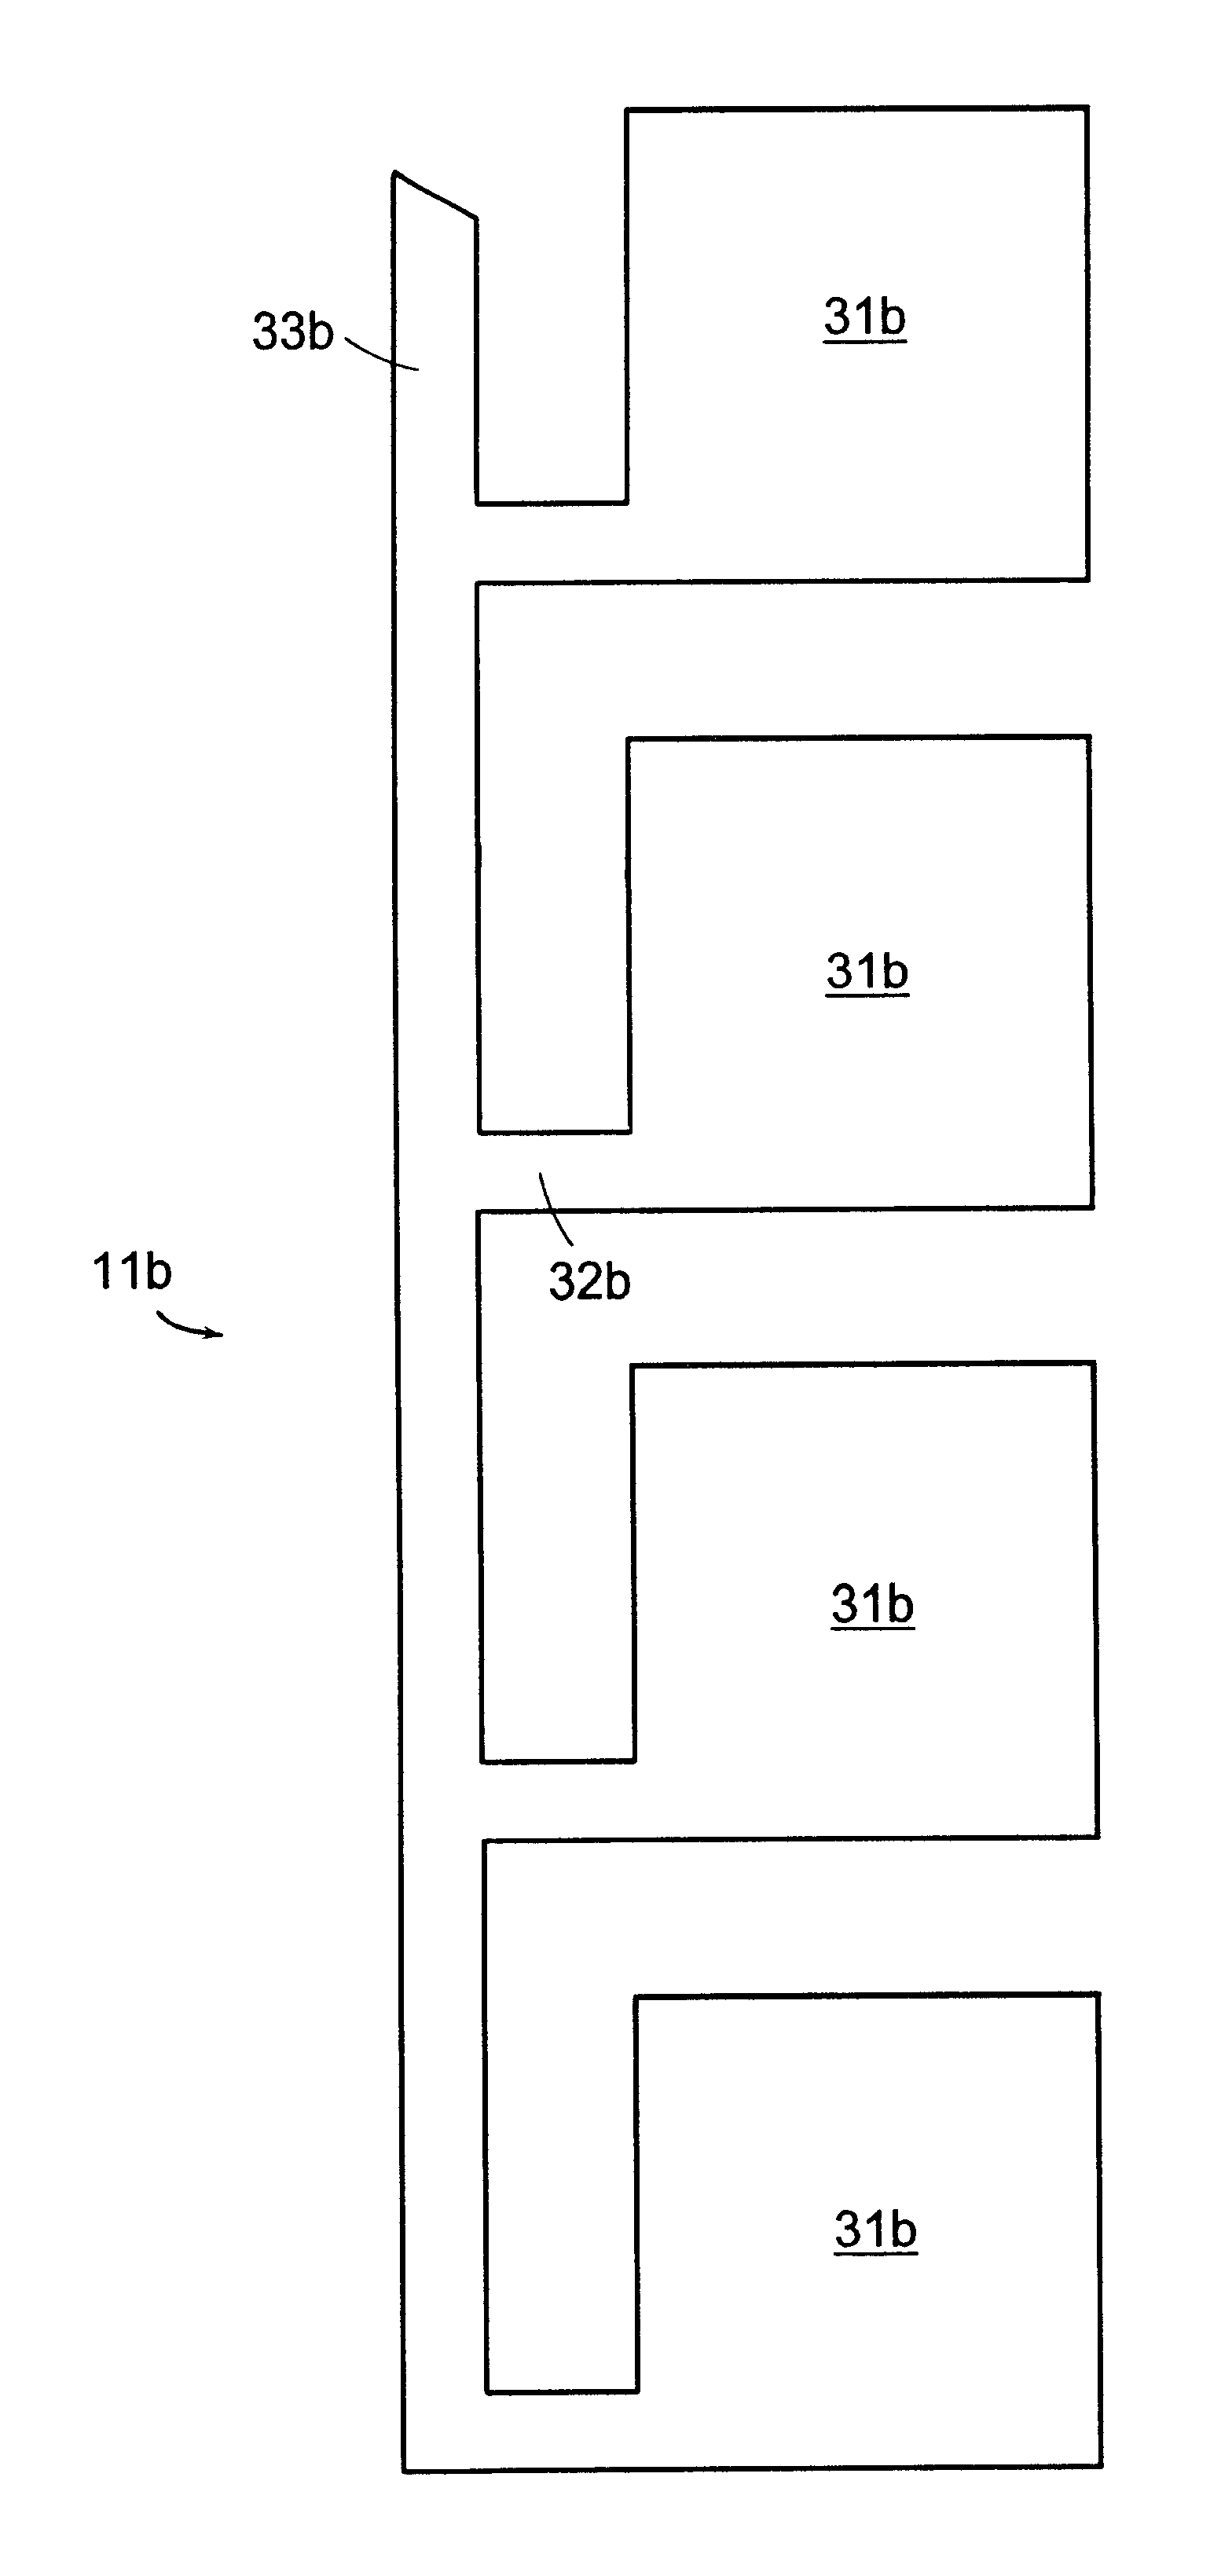 Electro-optic displays and optical systems for addressing such displays